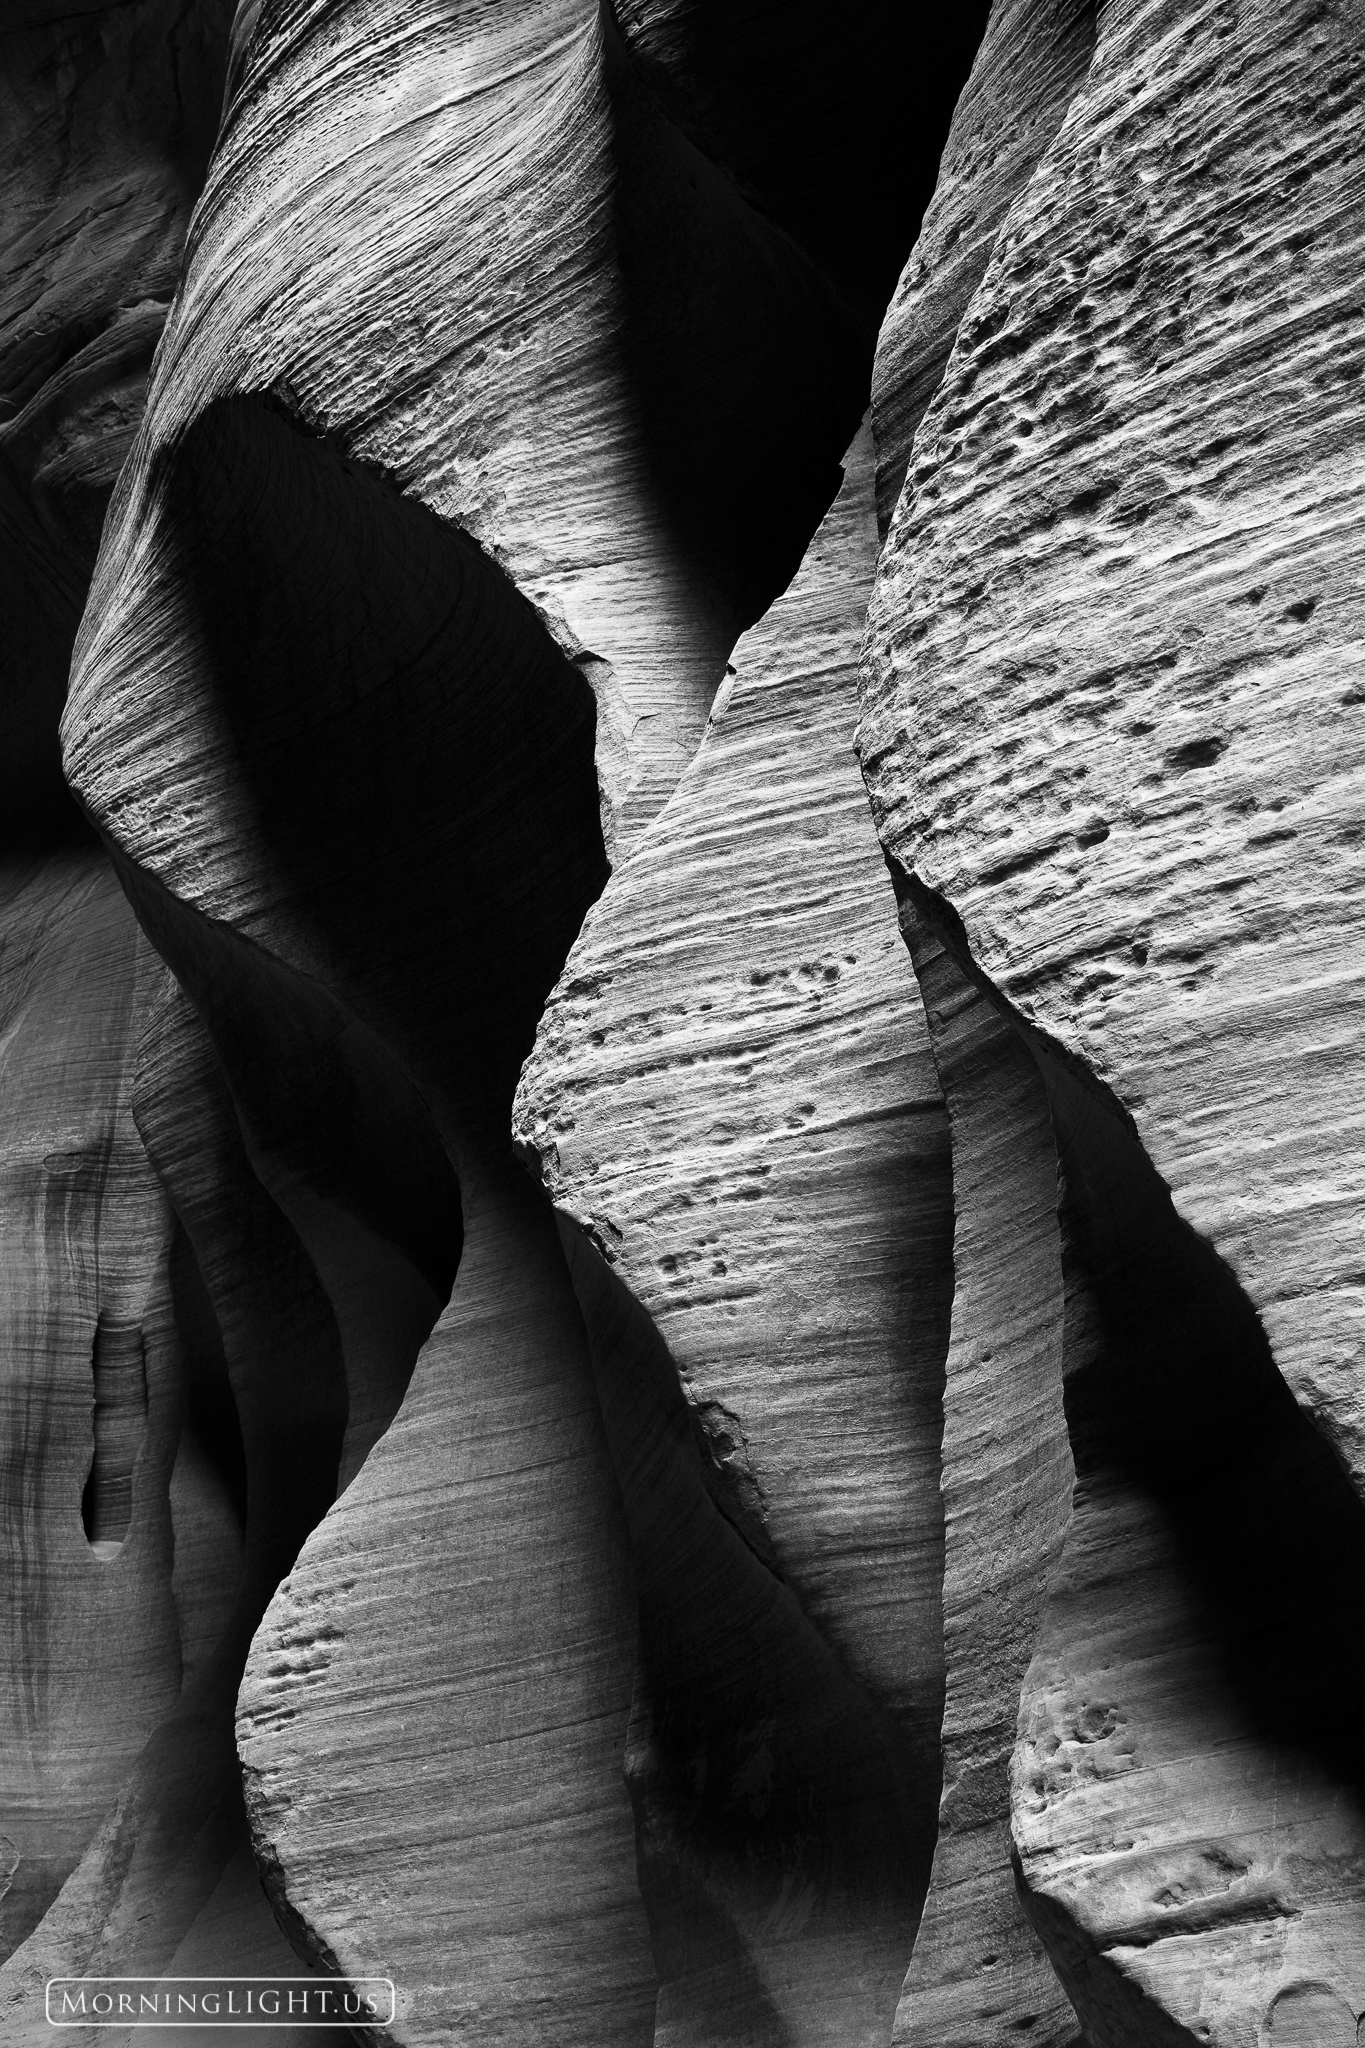 The walls of this area of Buckskin Gulch have taken on the most interesting shapes and textures with this repeating almost wave...